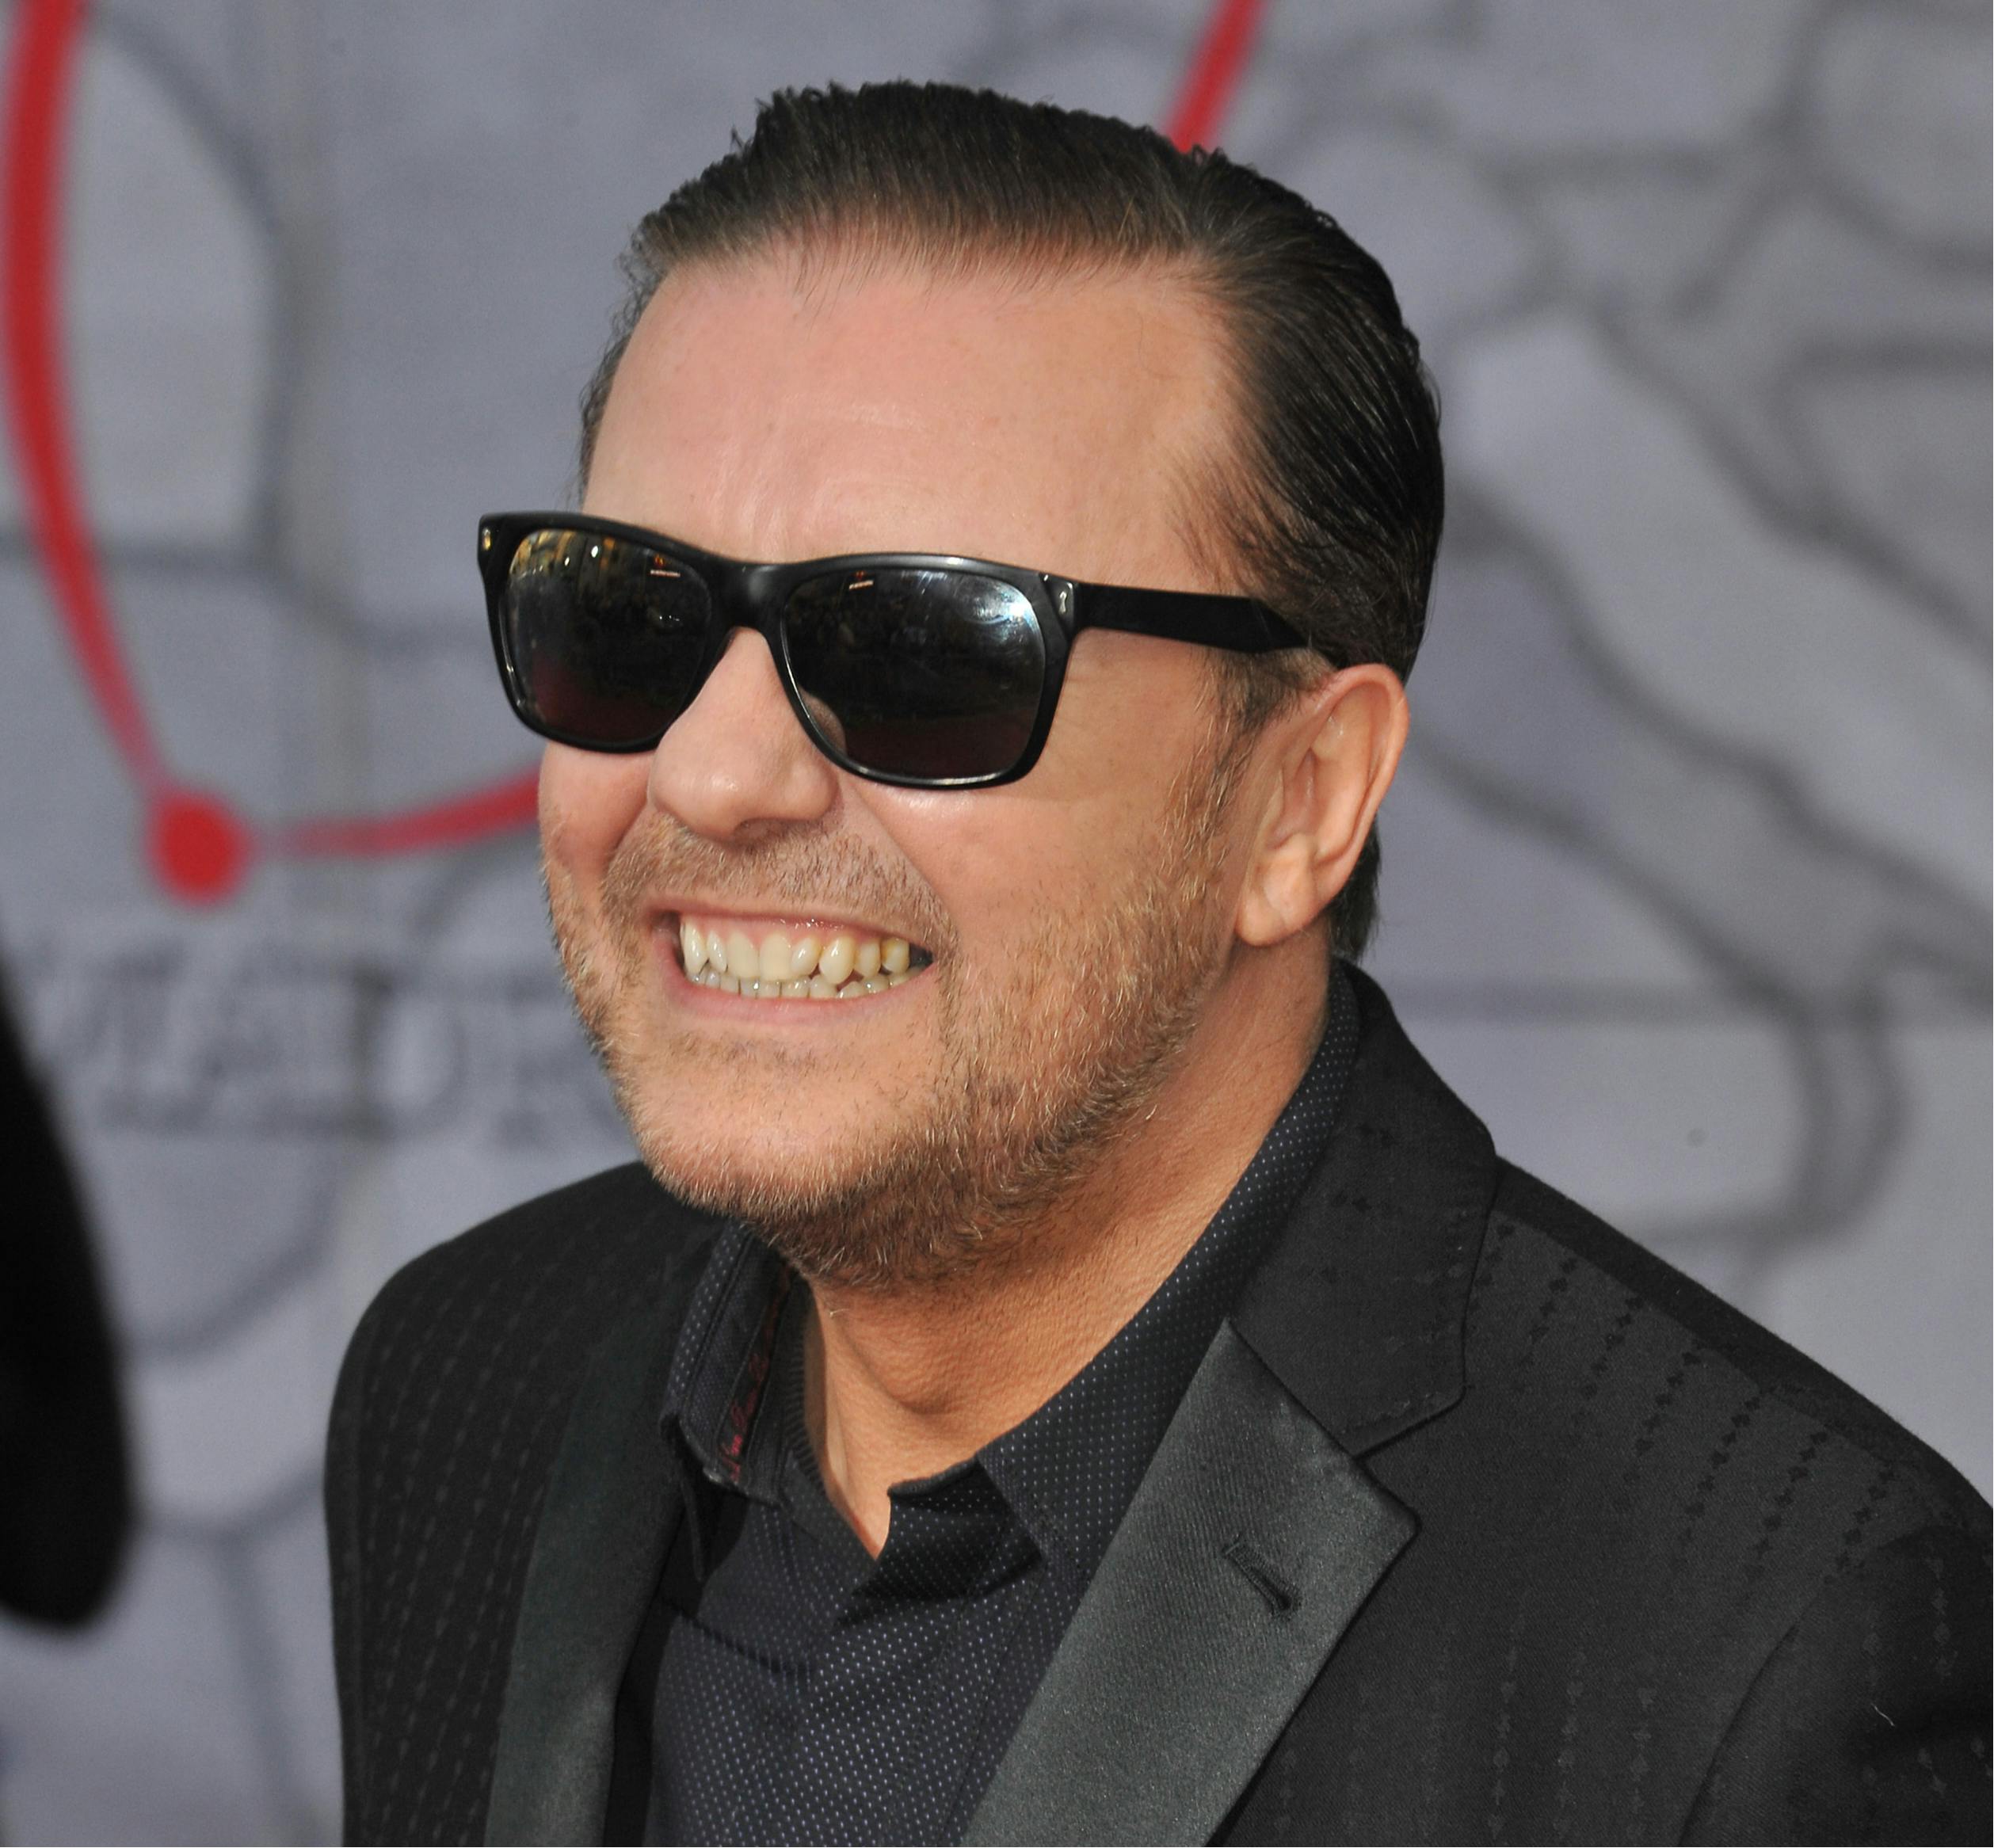 People are calling for Ricky Gervais to be sacked after several tweets